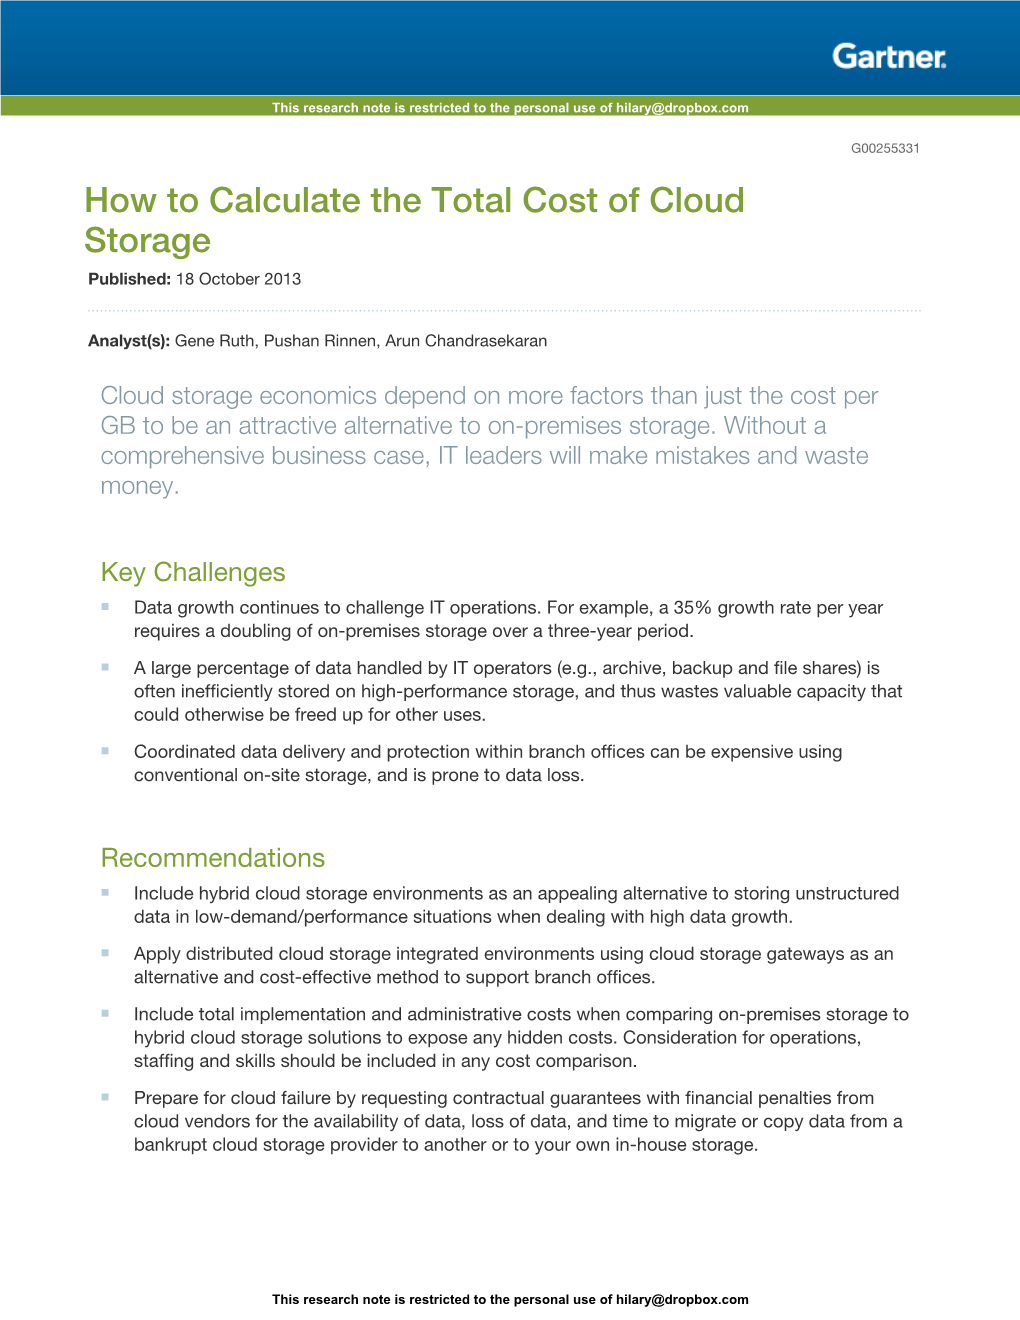 How to Calculate the Total Cost of Cloud Storage Published: 18 October 2013